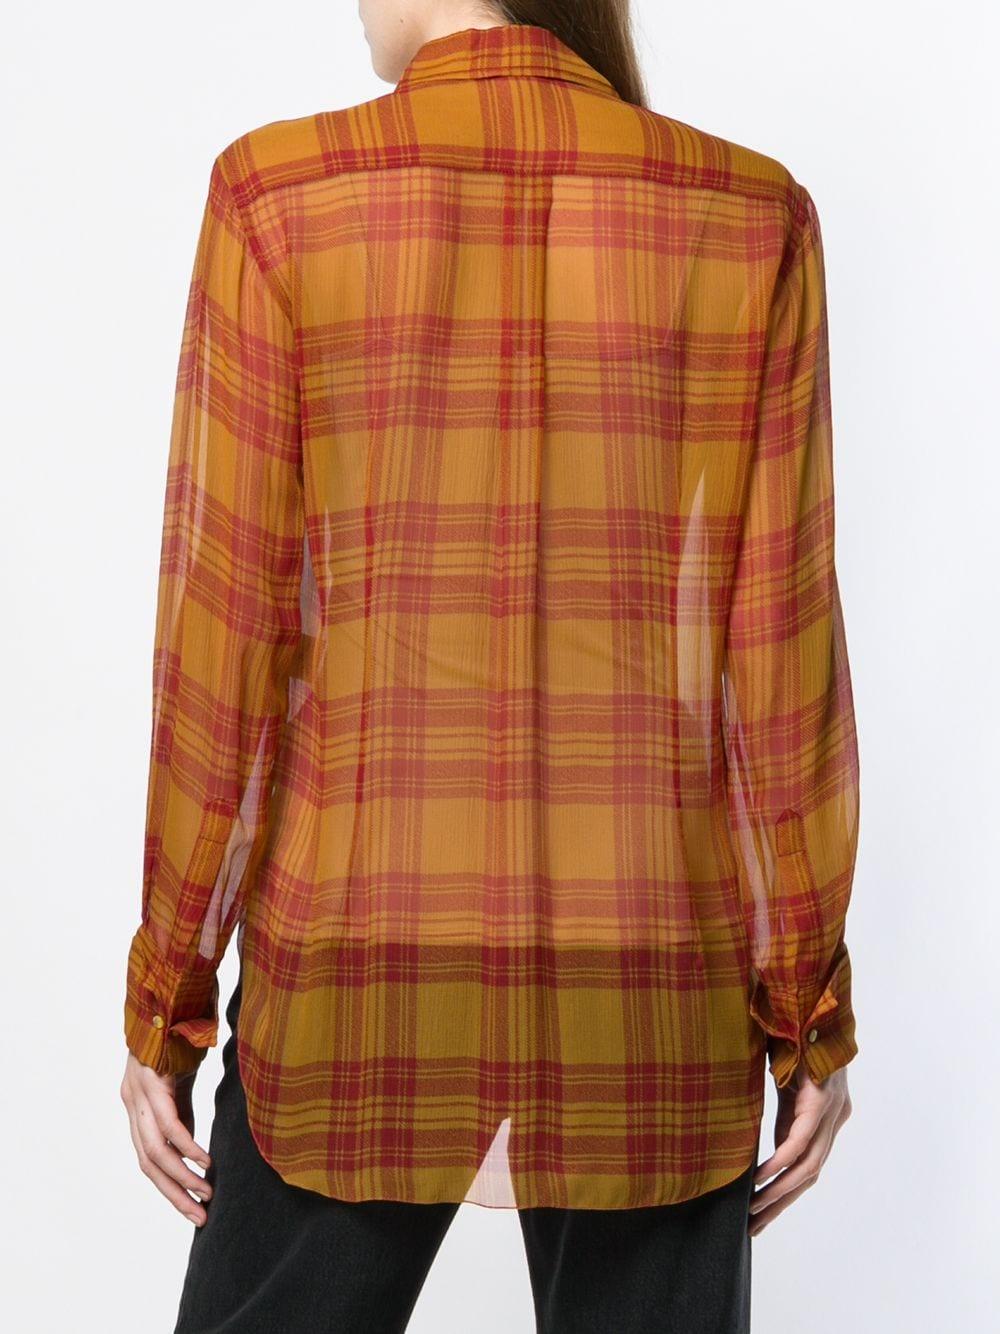 Hermes silk shirt by Martin Margiela featuring a check pattern, a georgette silk base,  long sleeves.  
100% silk 
Estimated size: 38fr/US6 /UK10
In excellent vintage condition. Made in France.
Chest: 41.7in (106cm)
Length: 25,9in. (66cm)
Sleeve